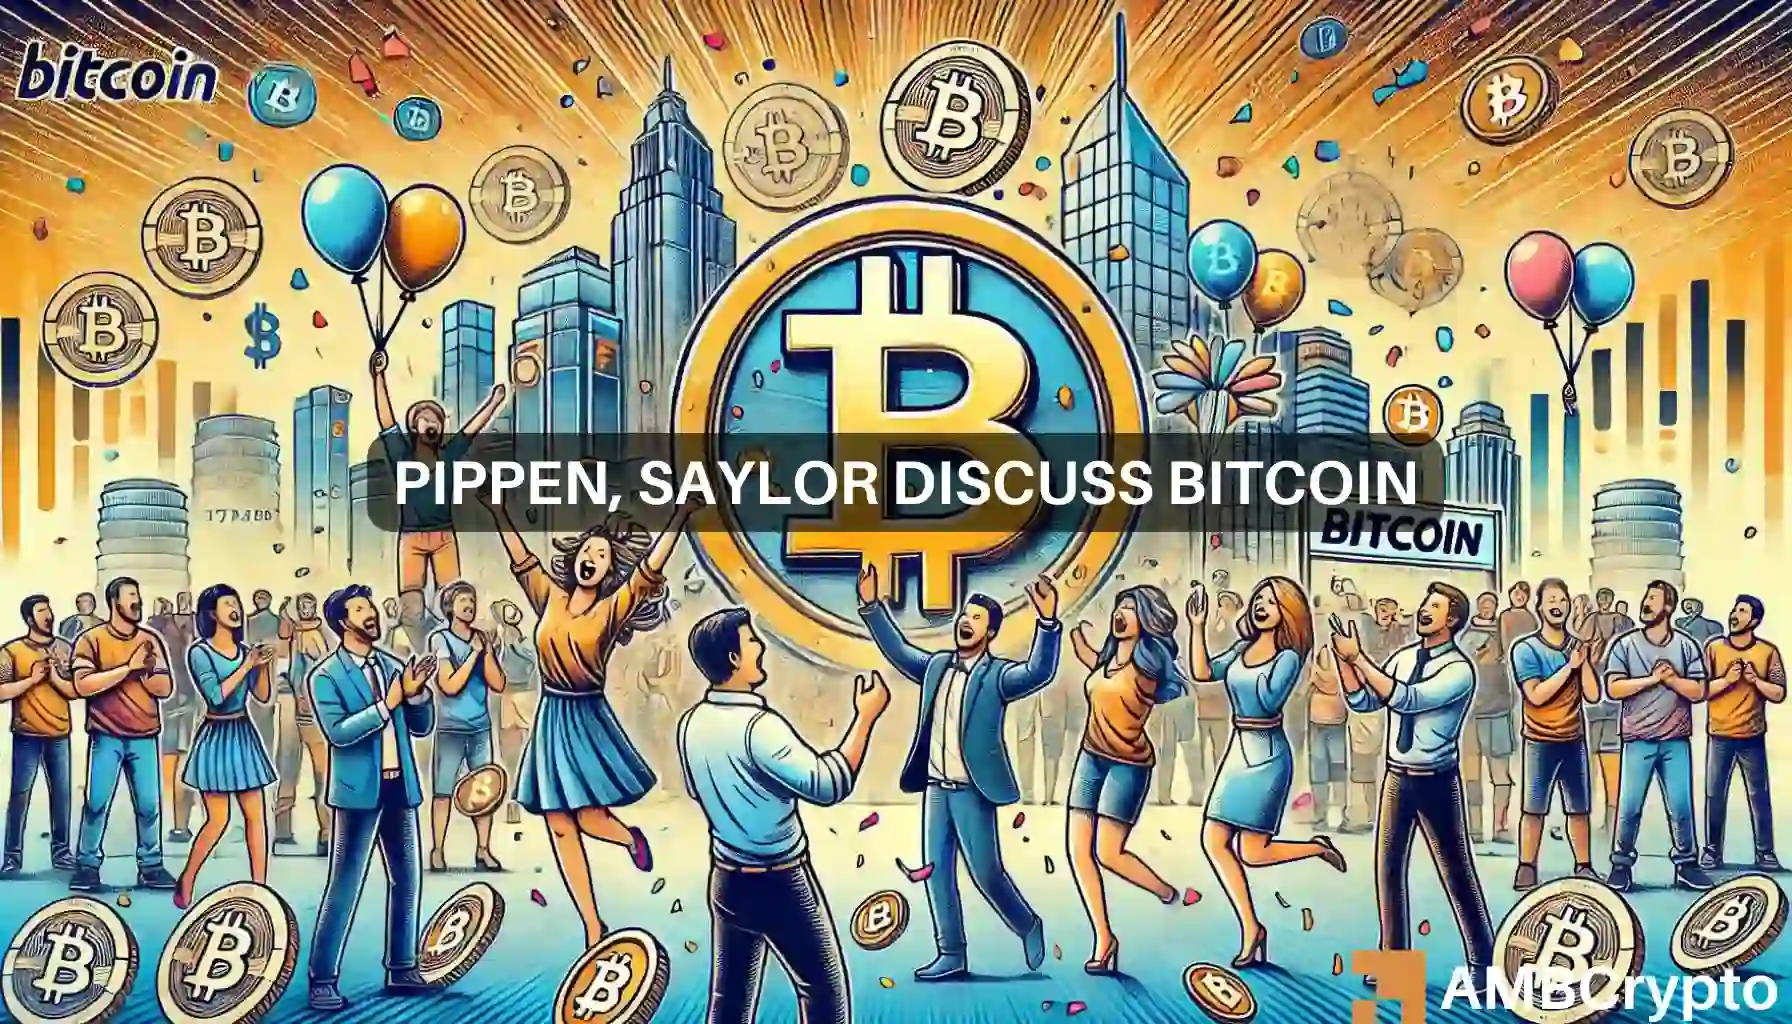 Michael Saylor says ‘Buy Bitcoin!’ to NBA legend Scottie Pippen: Why?